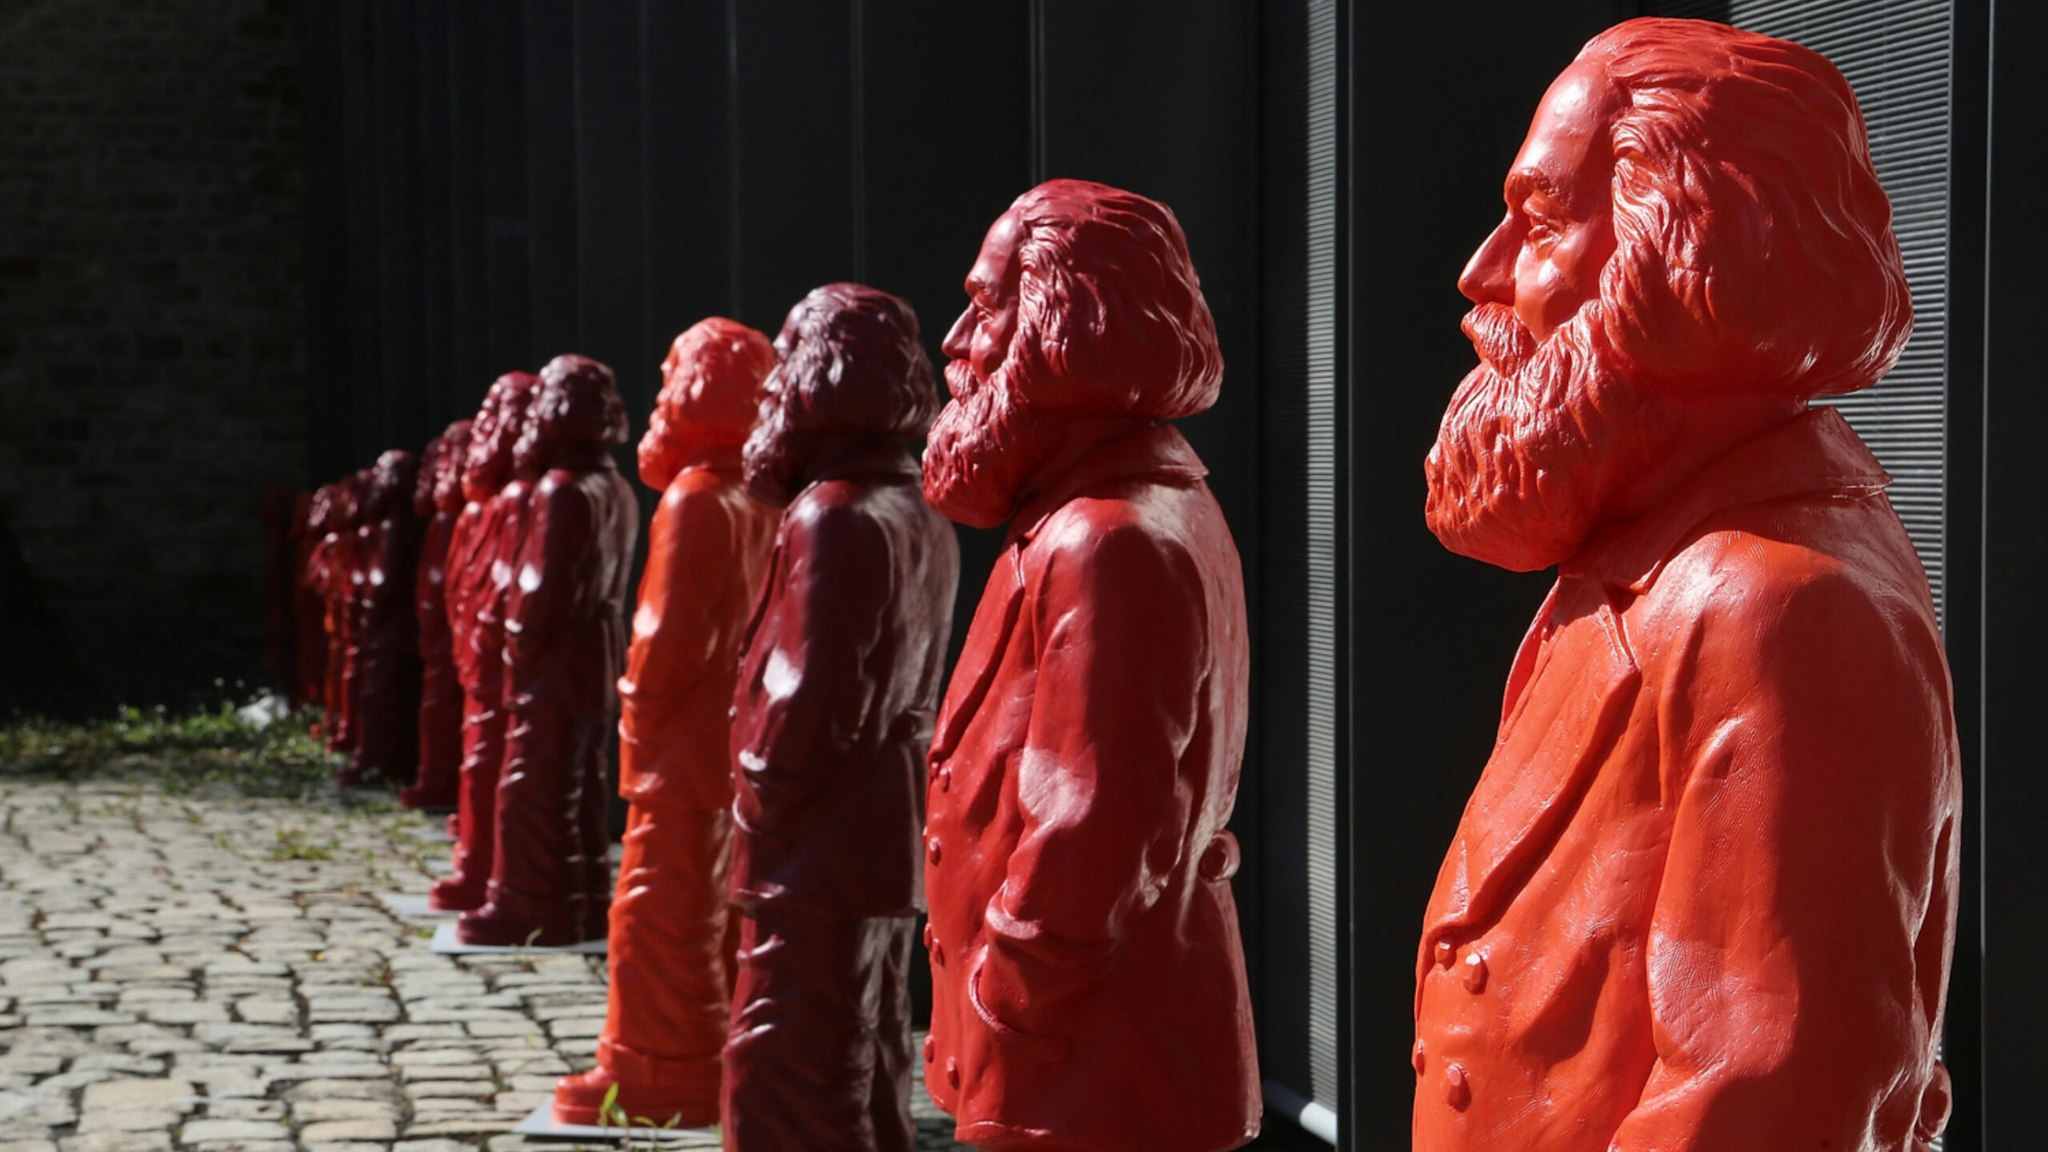 Some of the 500, one meter tall statues of German political thinker Karl Marx on display on May 5, 2013 in Trier, Germany.